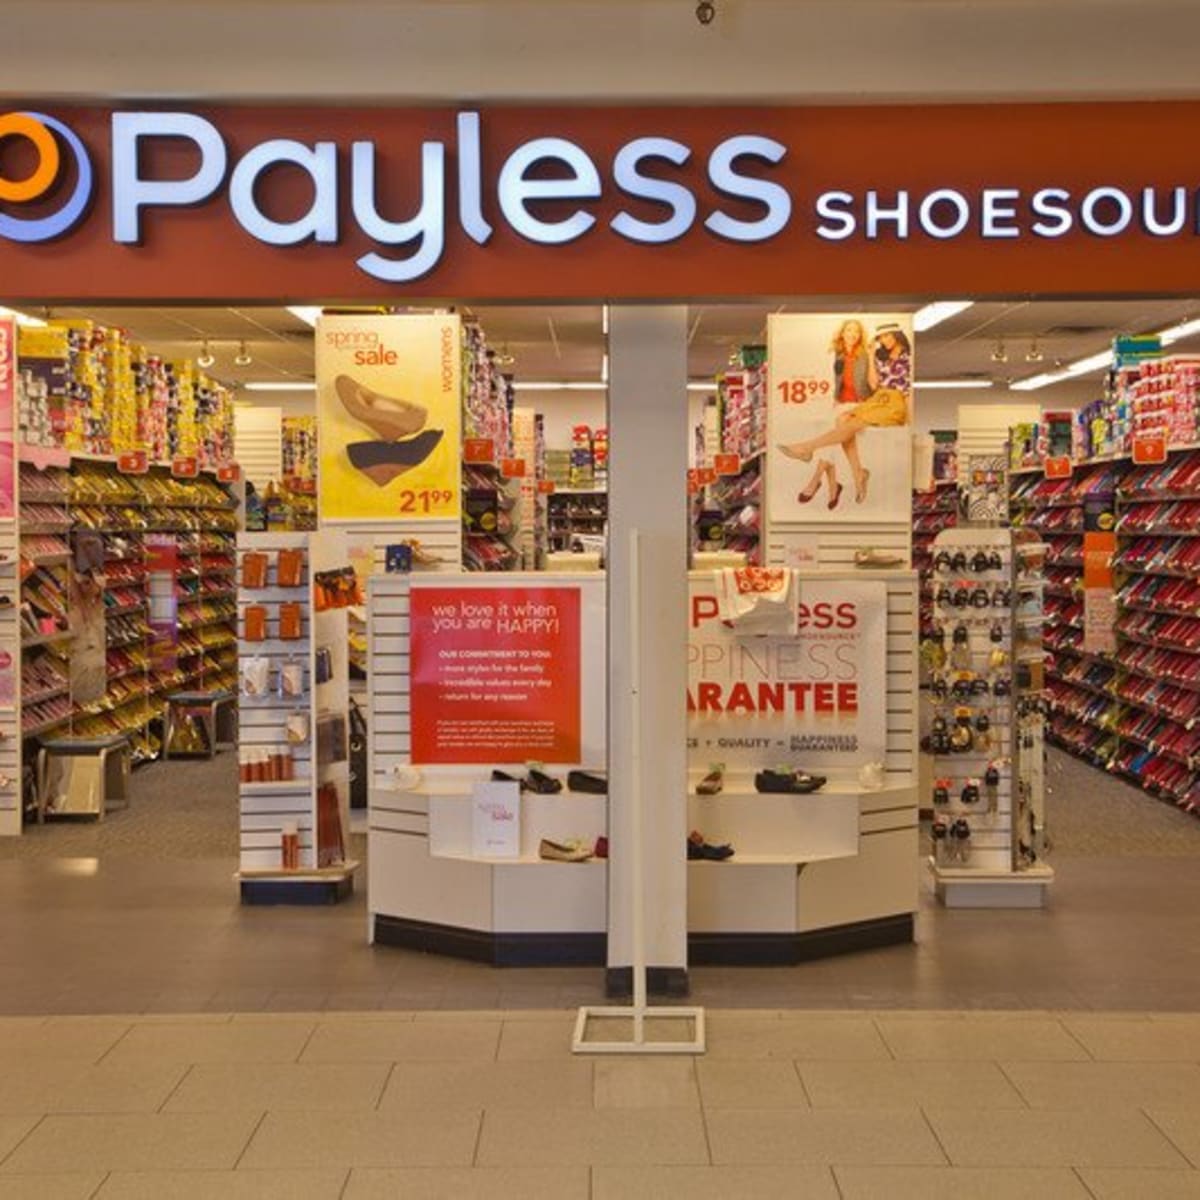 payless shoesource shoes